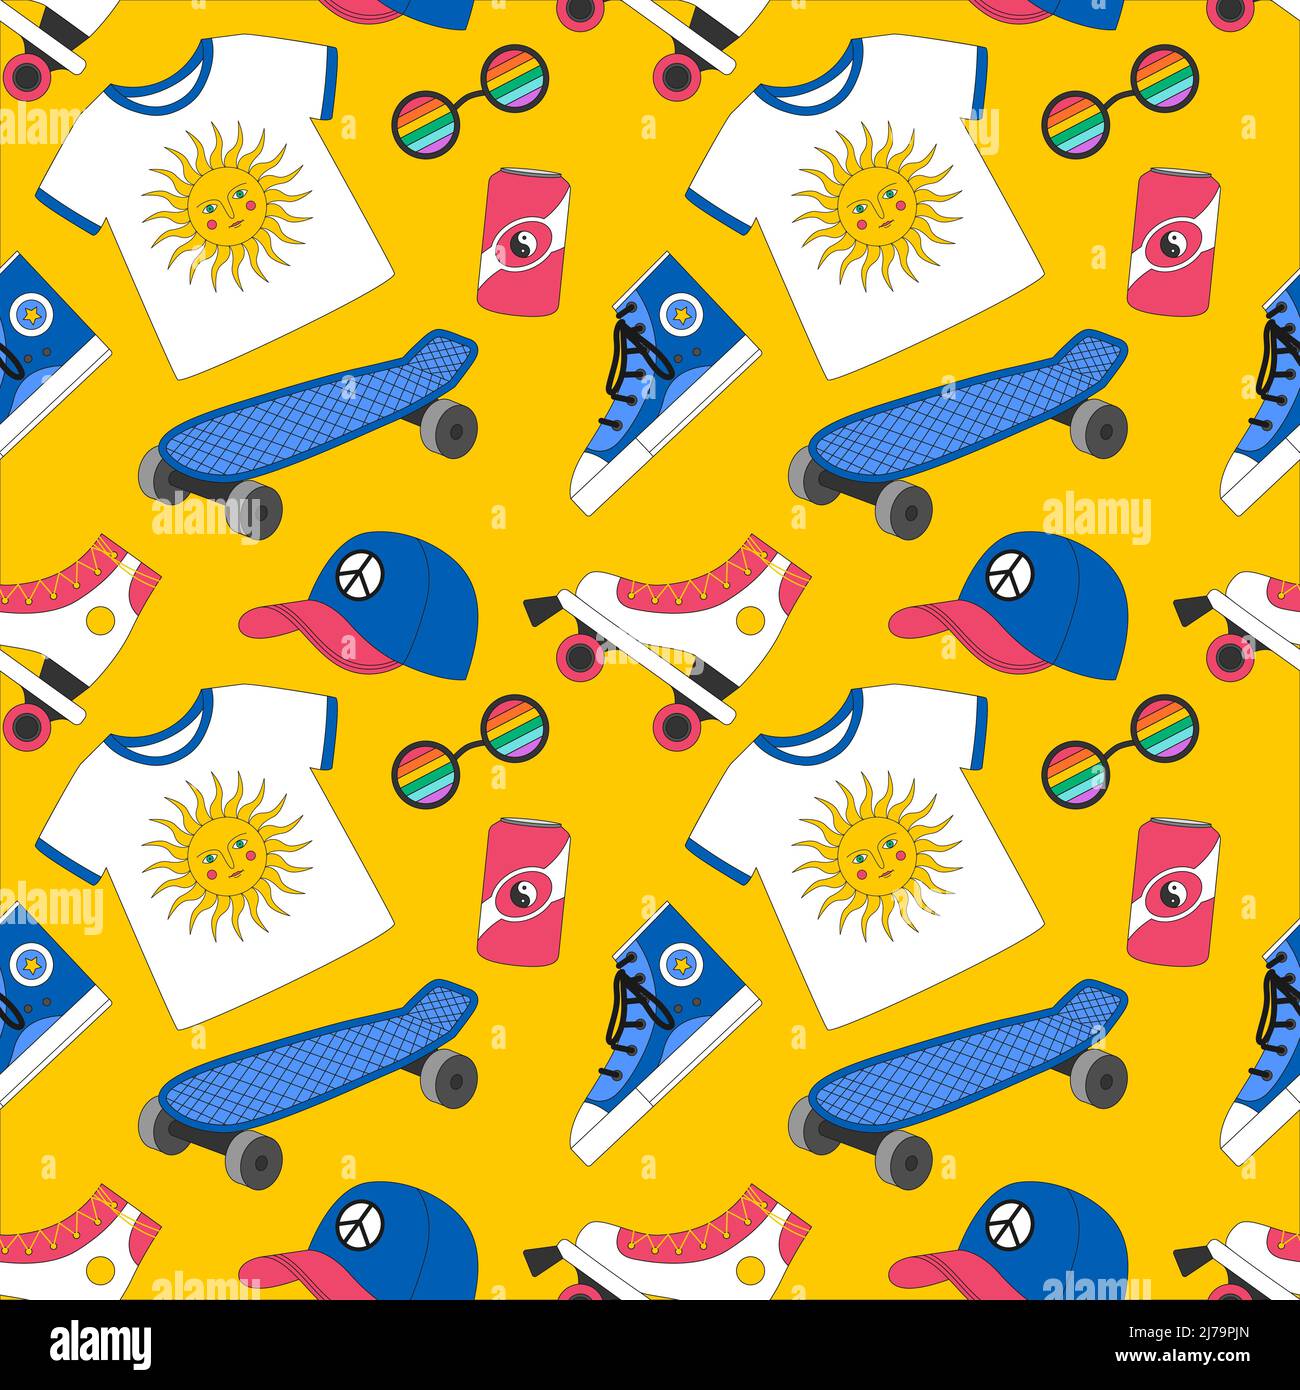 Seamless pattern with retro, vintage. Sneakers, roller skates, cap, skateboard, T-shirt. Symbols of the 90s. Great for textiles and wrapping paper. Co Stock Vector